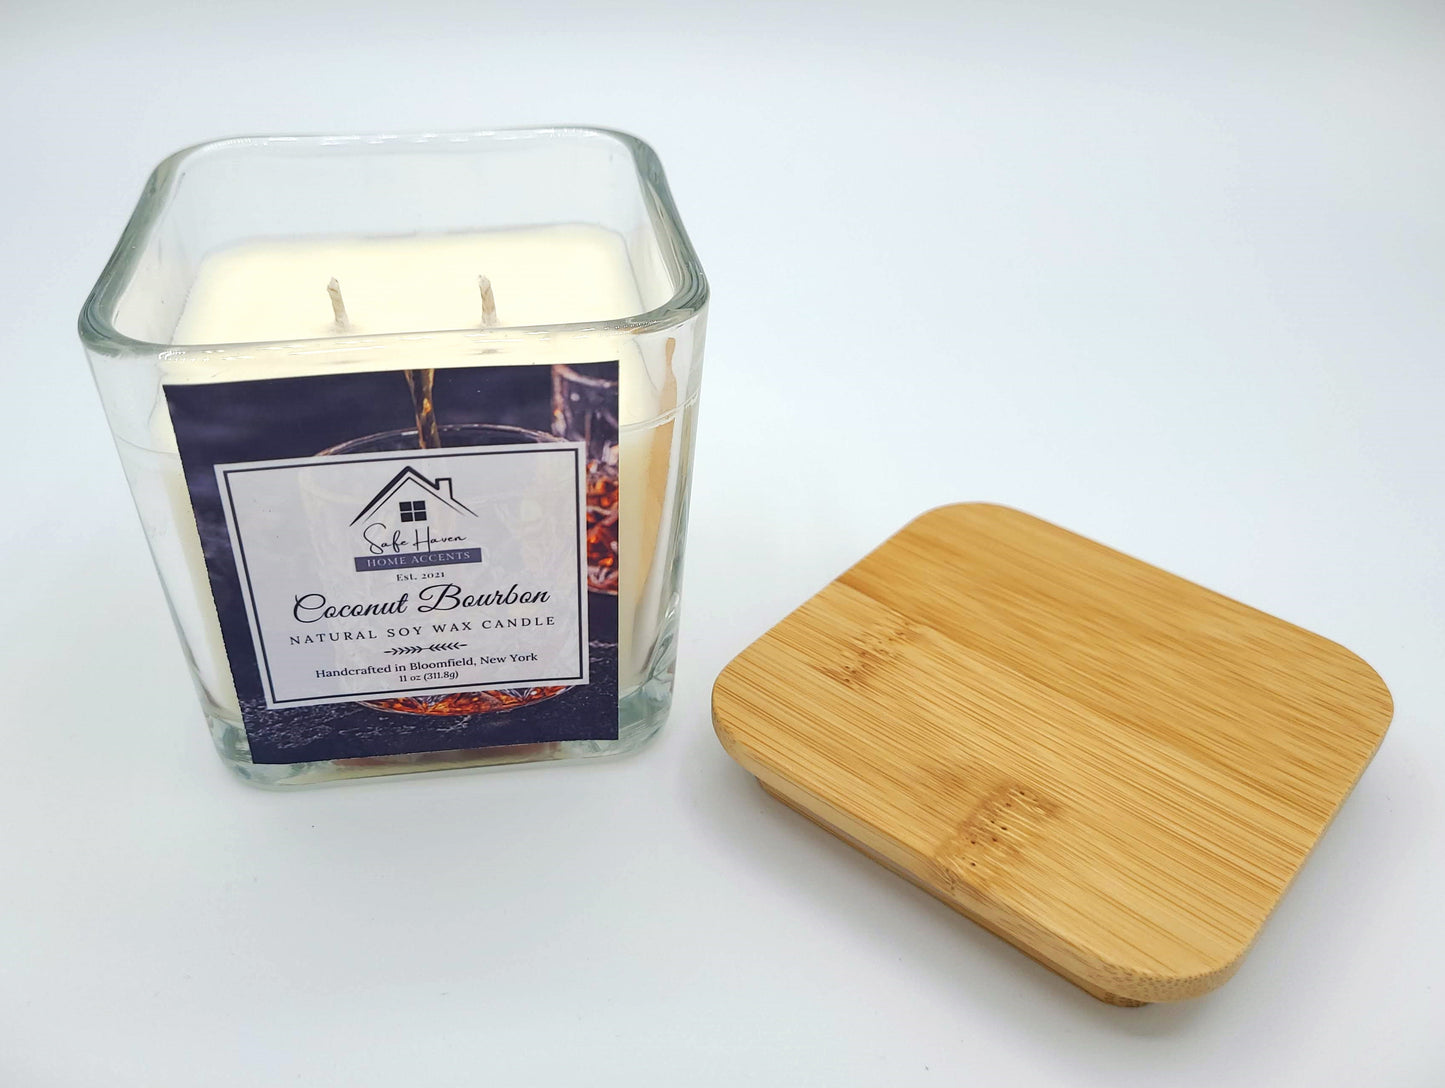 Coconut Bourbon Natural Soy Wax Candle